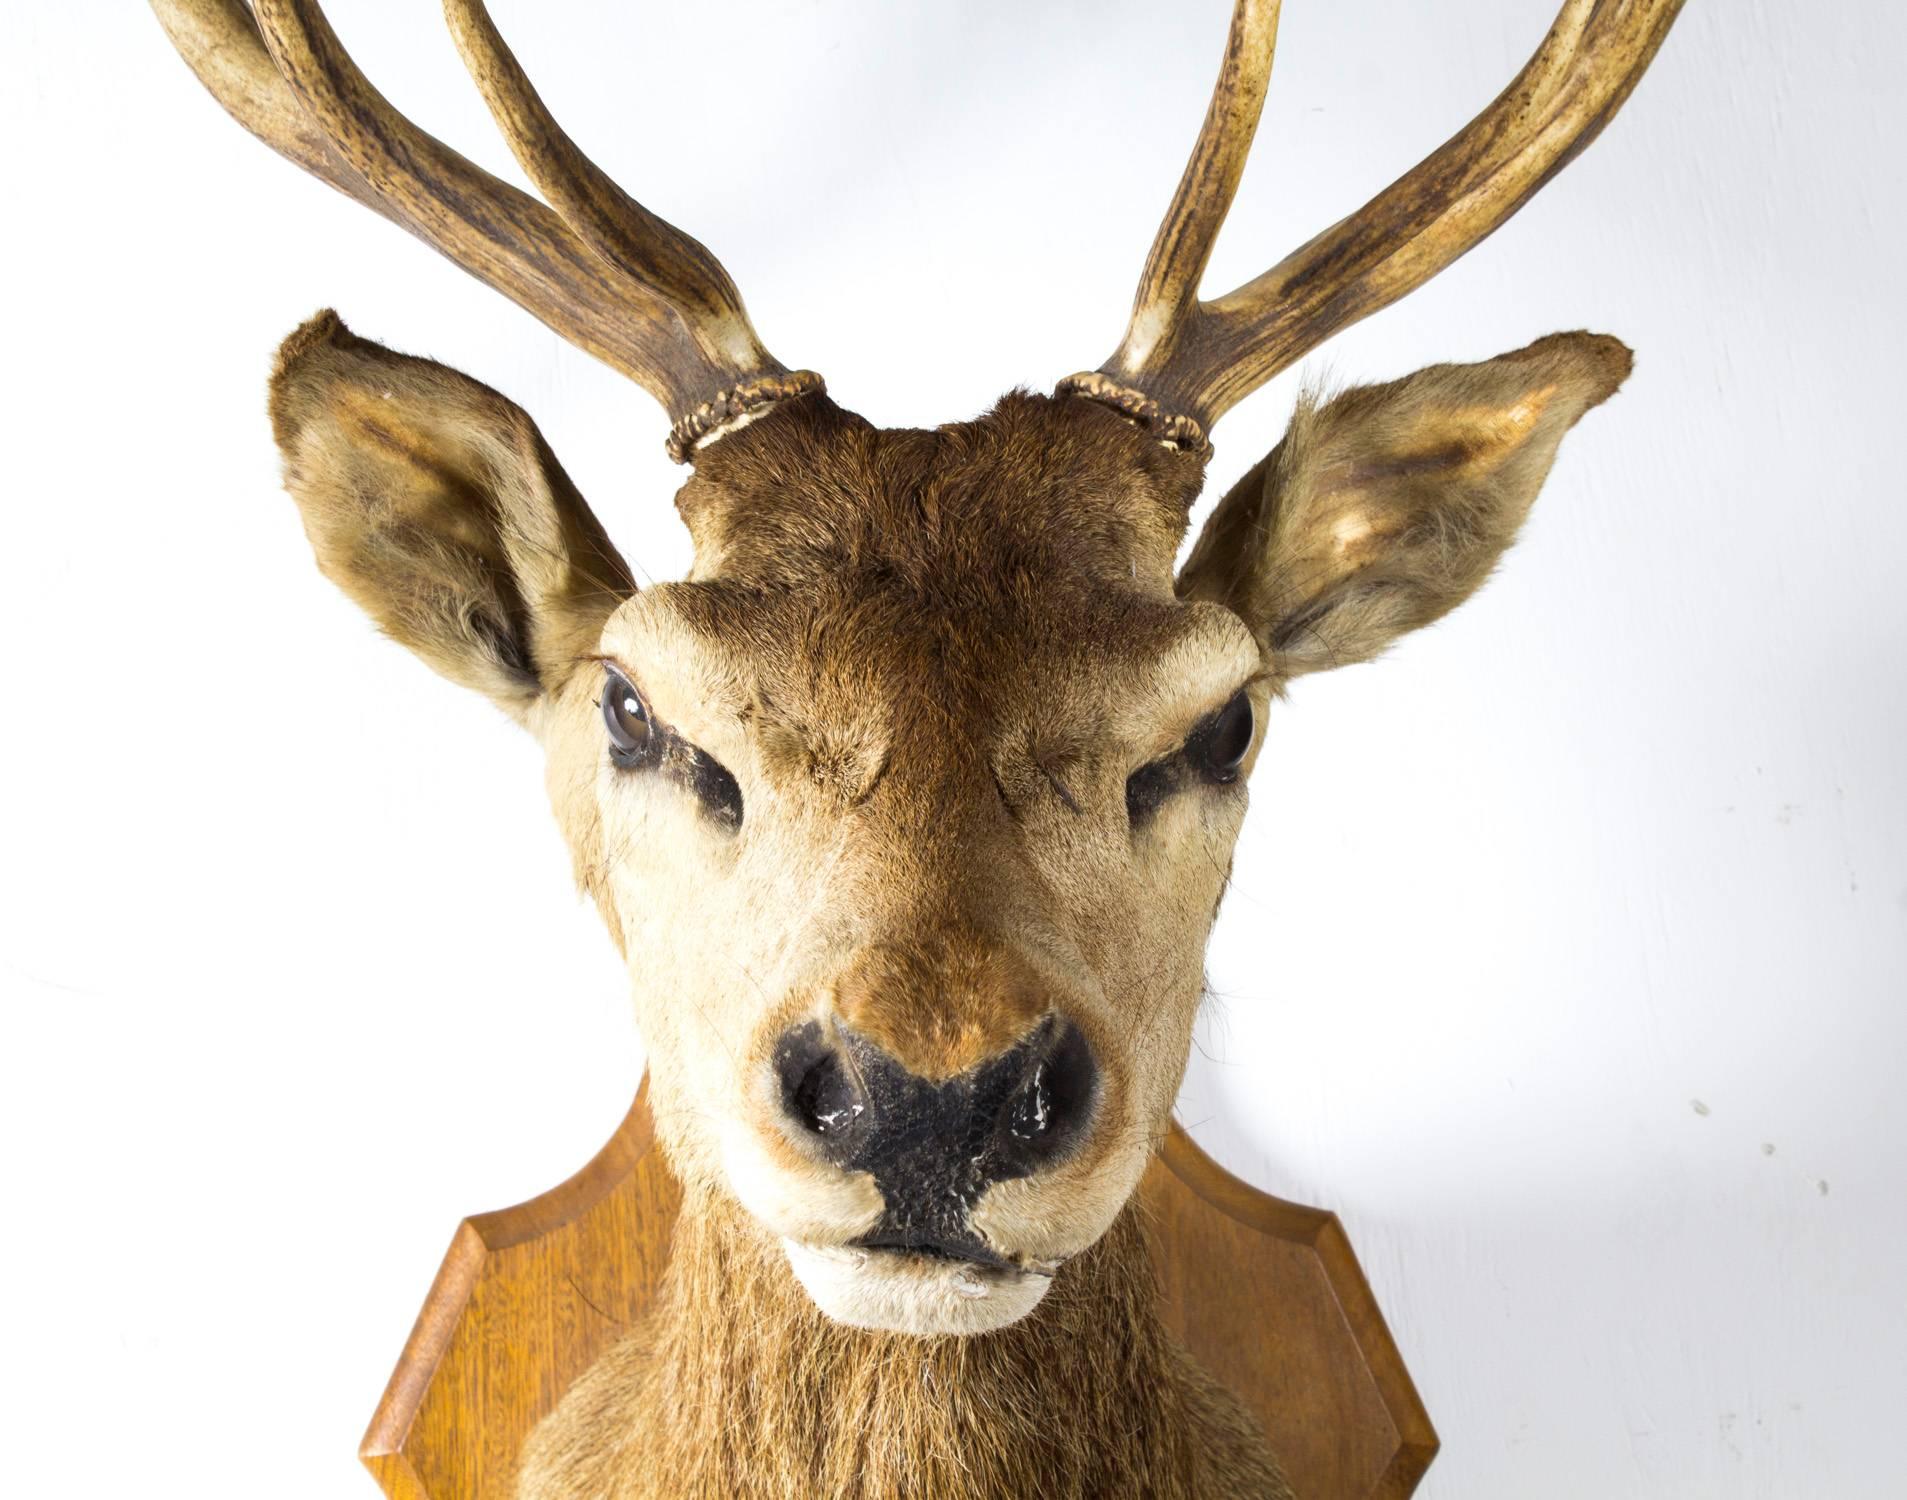 A large magnificent Scottish red deer stag taxidermy mounted hunting trophies, dating from the, early 20th century.

The adult male stag is mounted on an oak armorial oak shield and is presented with its large antlers. 

A wonderful addition for